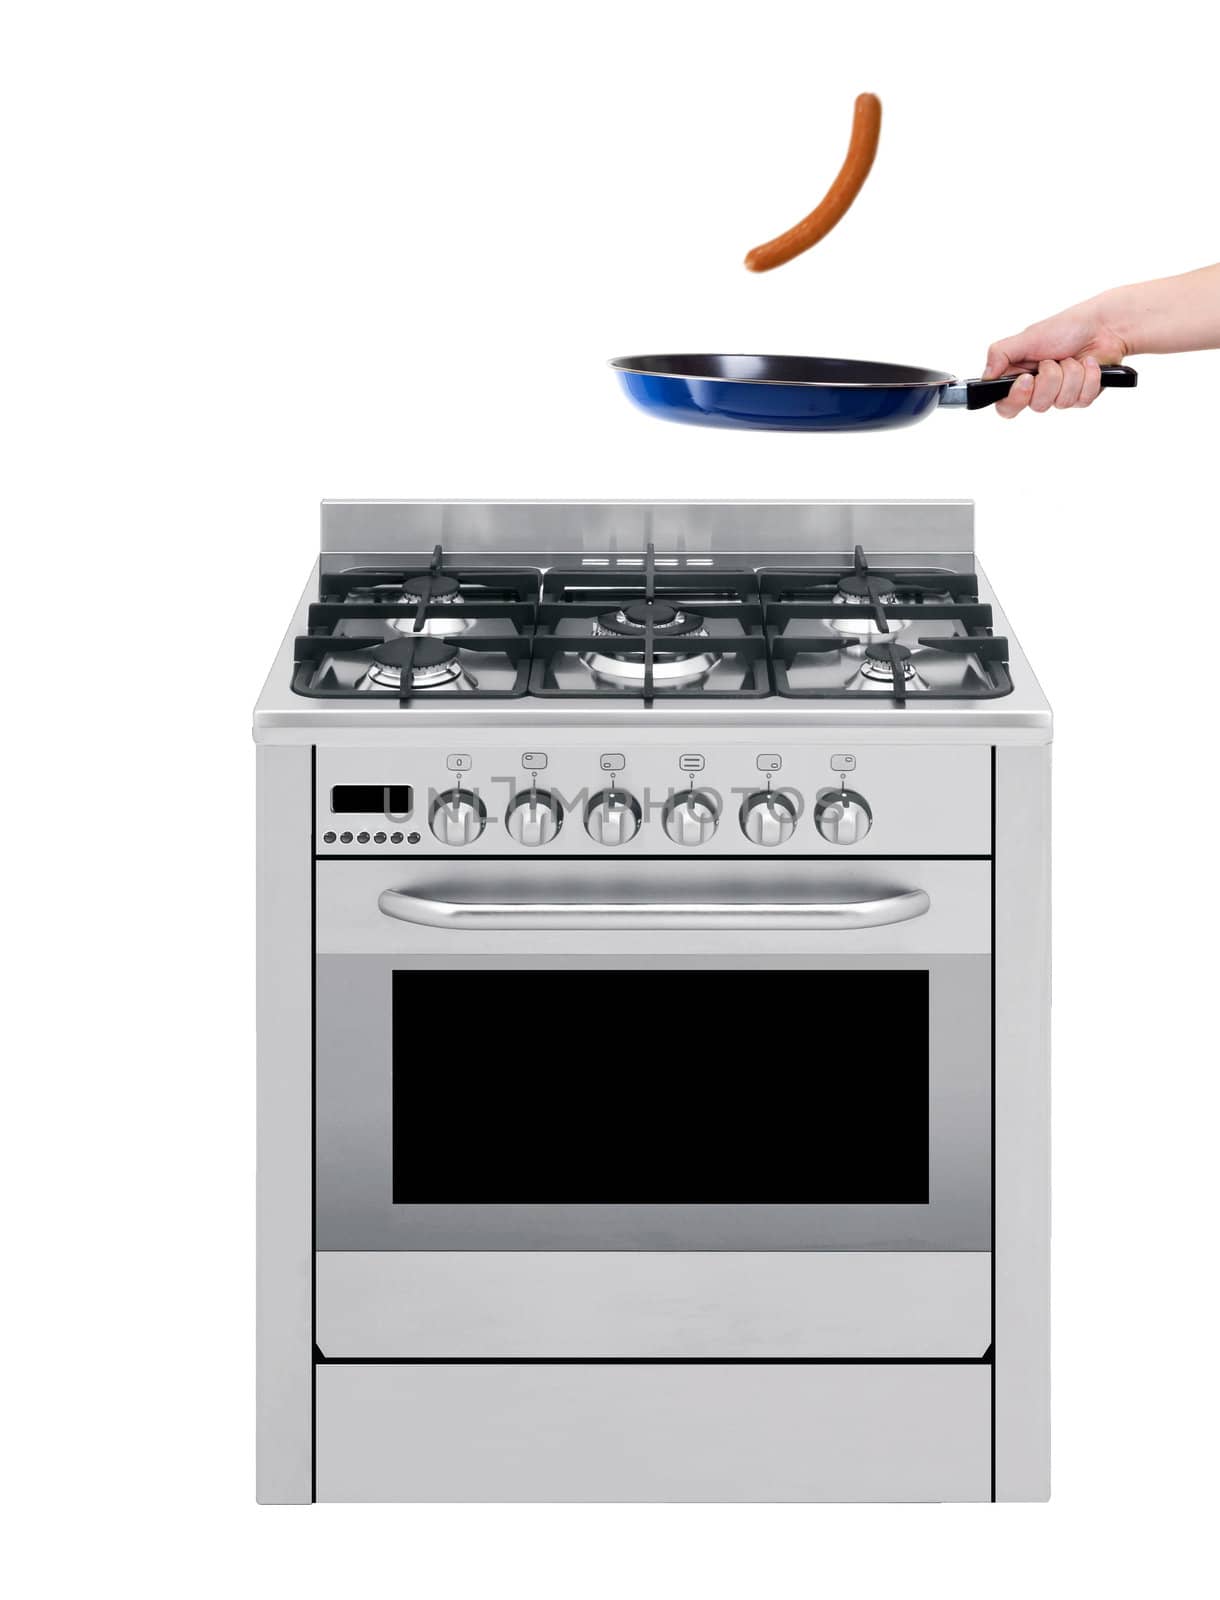 Hand and frying pan with gas-stove